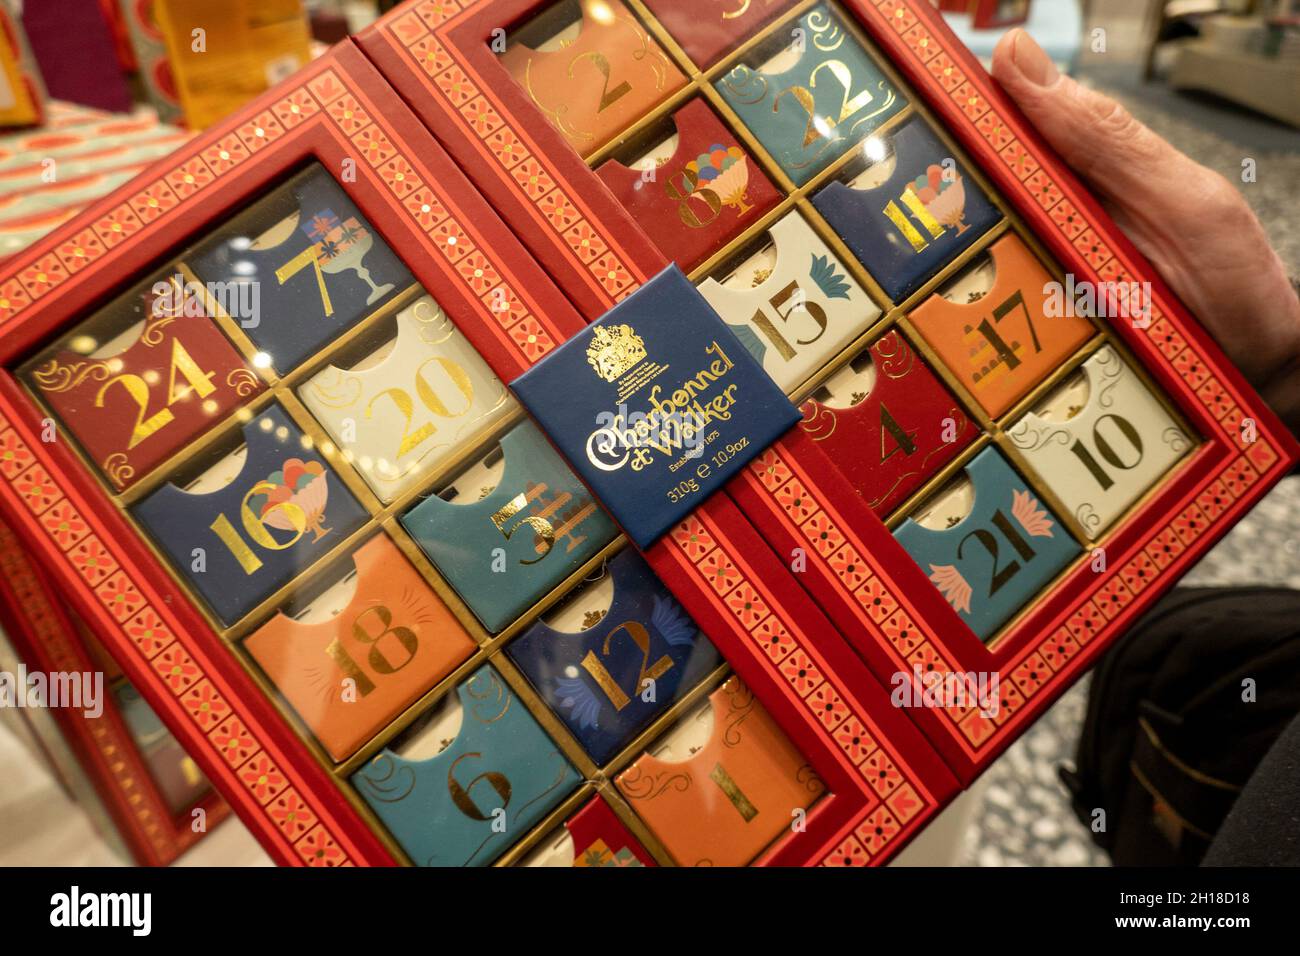 Christmas chocolate Advent calendar by Charbonnel et Walker is on display at Saks Fifth Avenue in New York City, USA  2021 Stock Photo